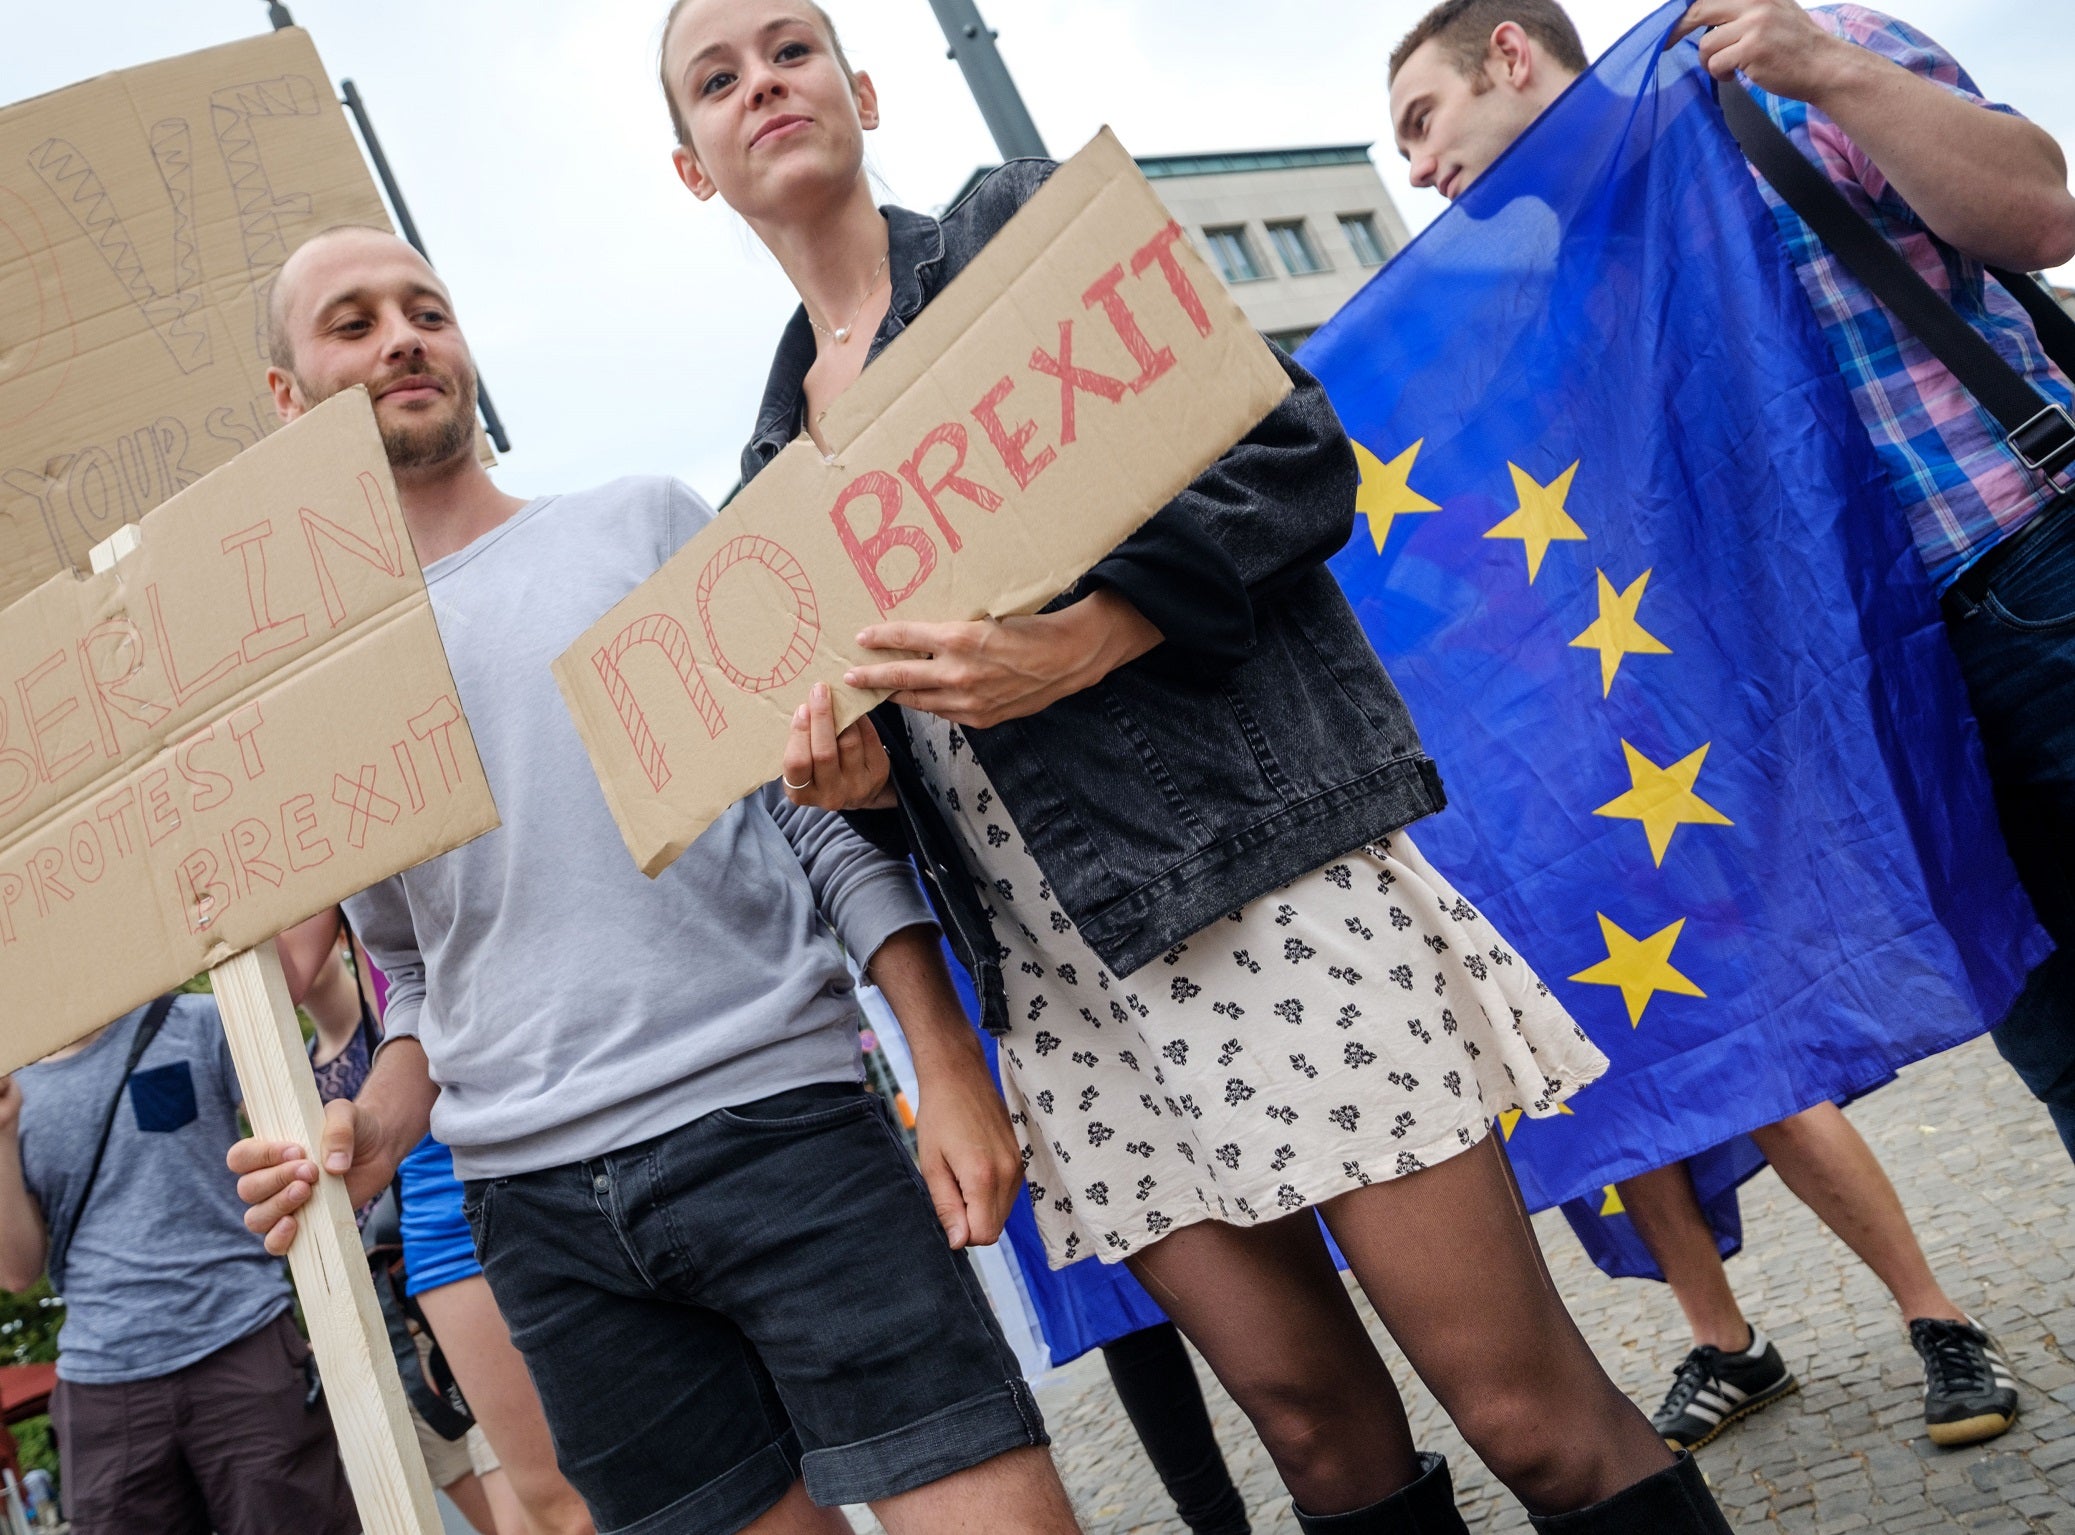 British expats hold up signs to protest for the United Kingdom to remain in the European Union on 2 July 2016 in Berlin, Germany